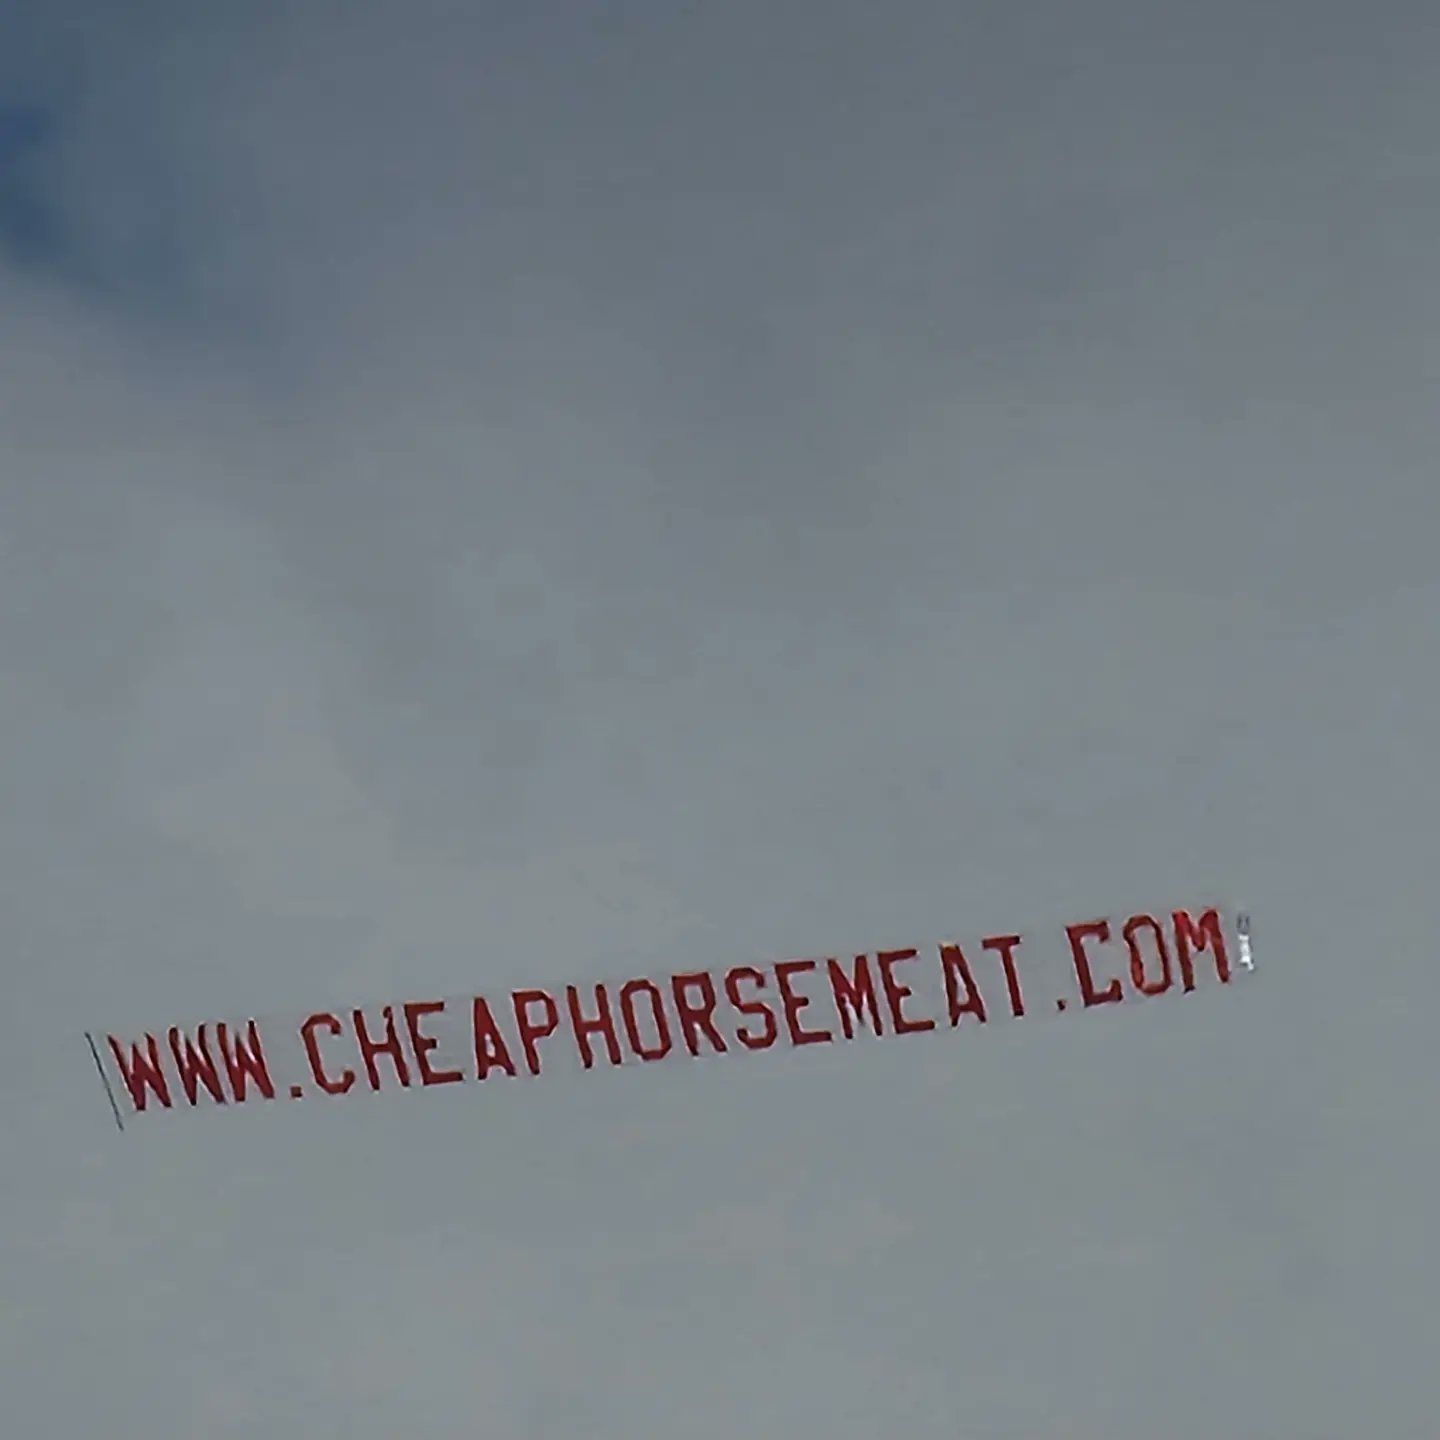 This banner just flew over the Grand National